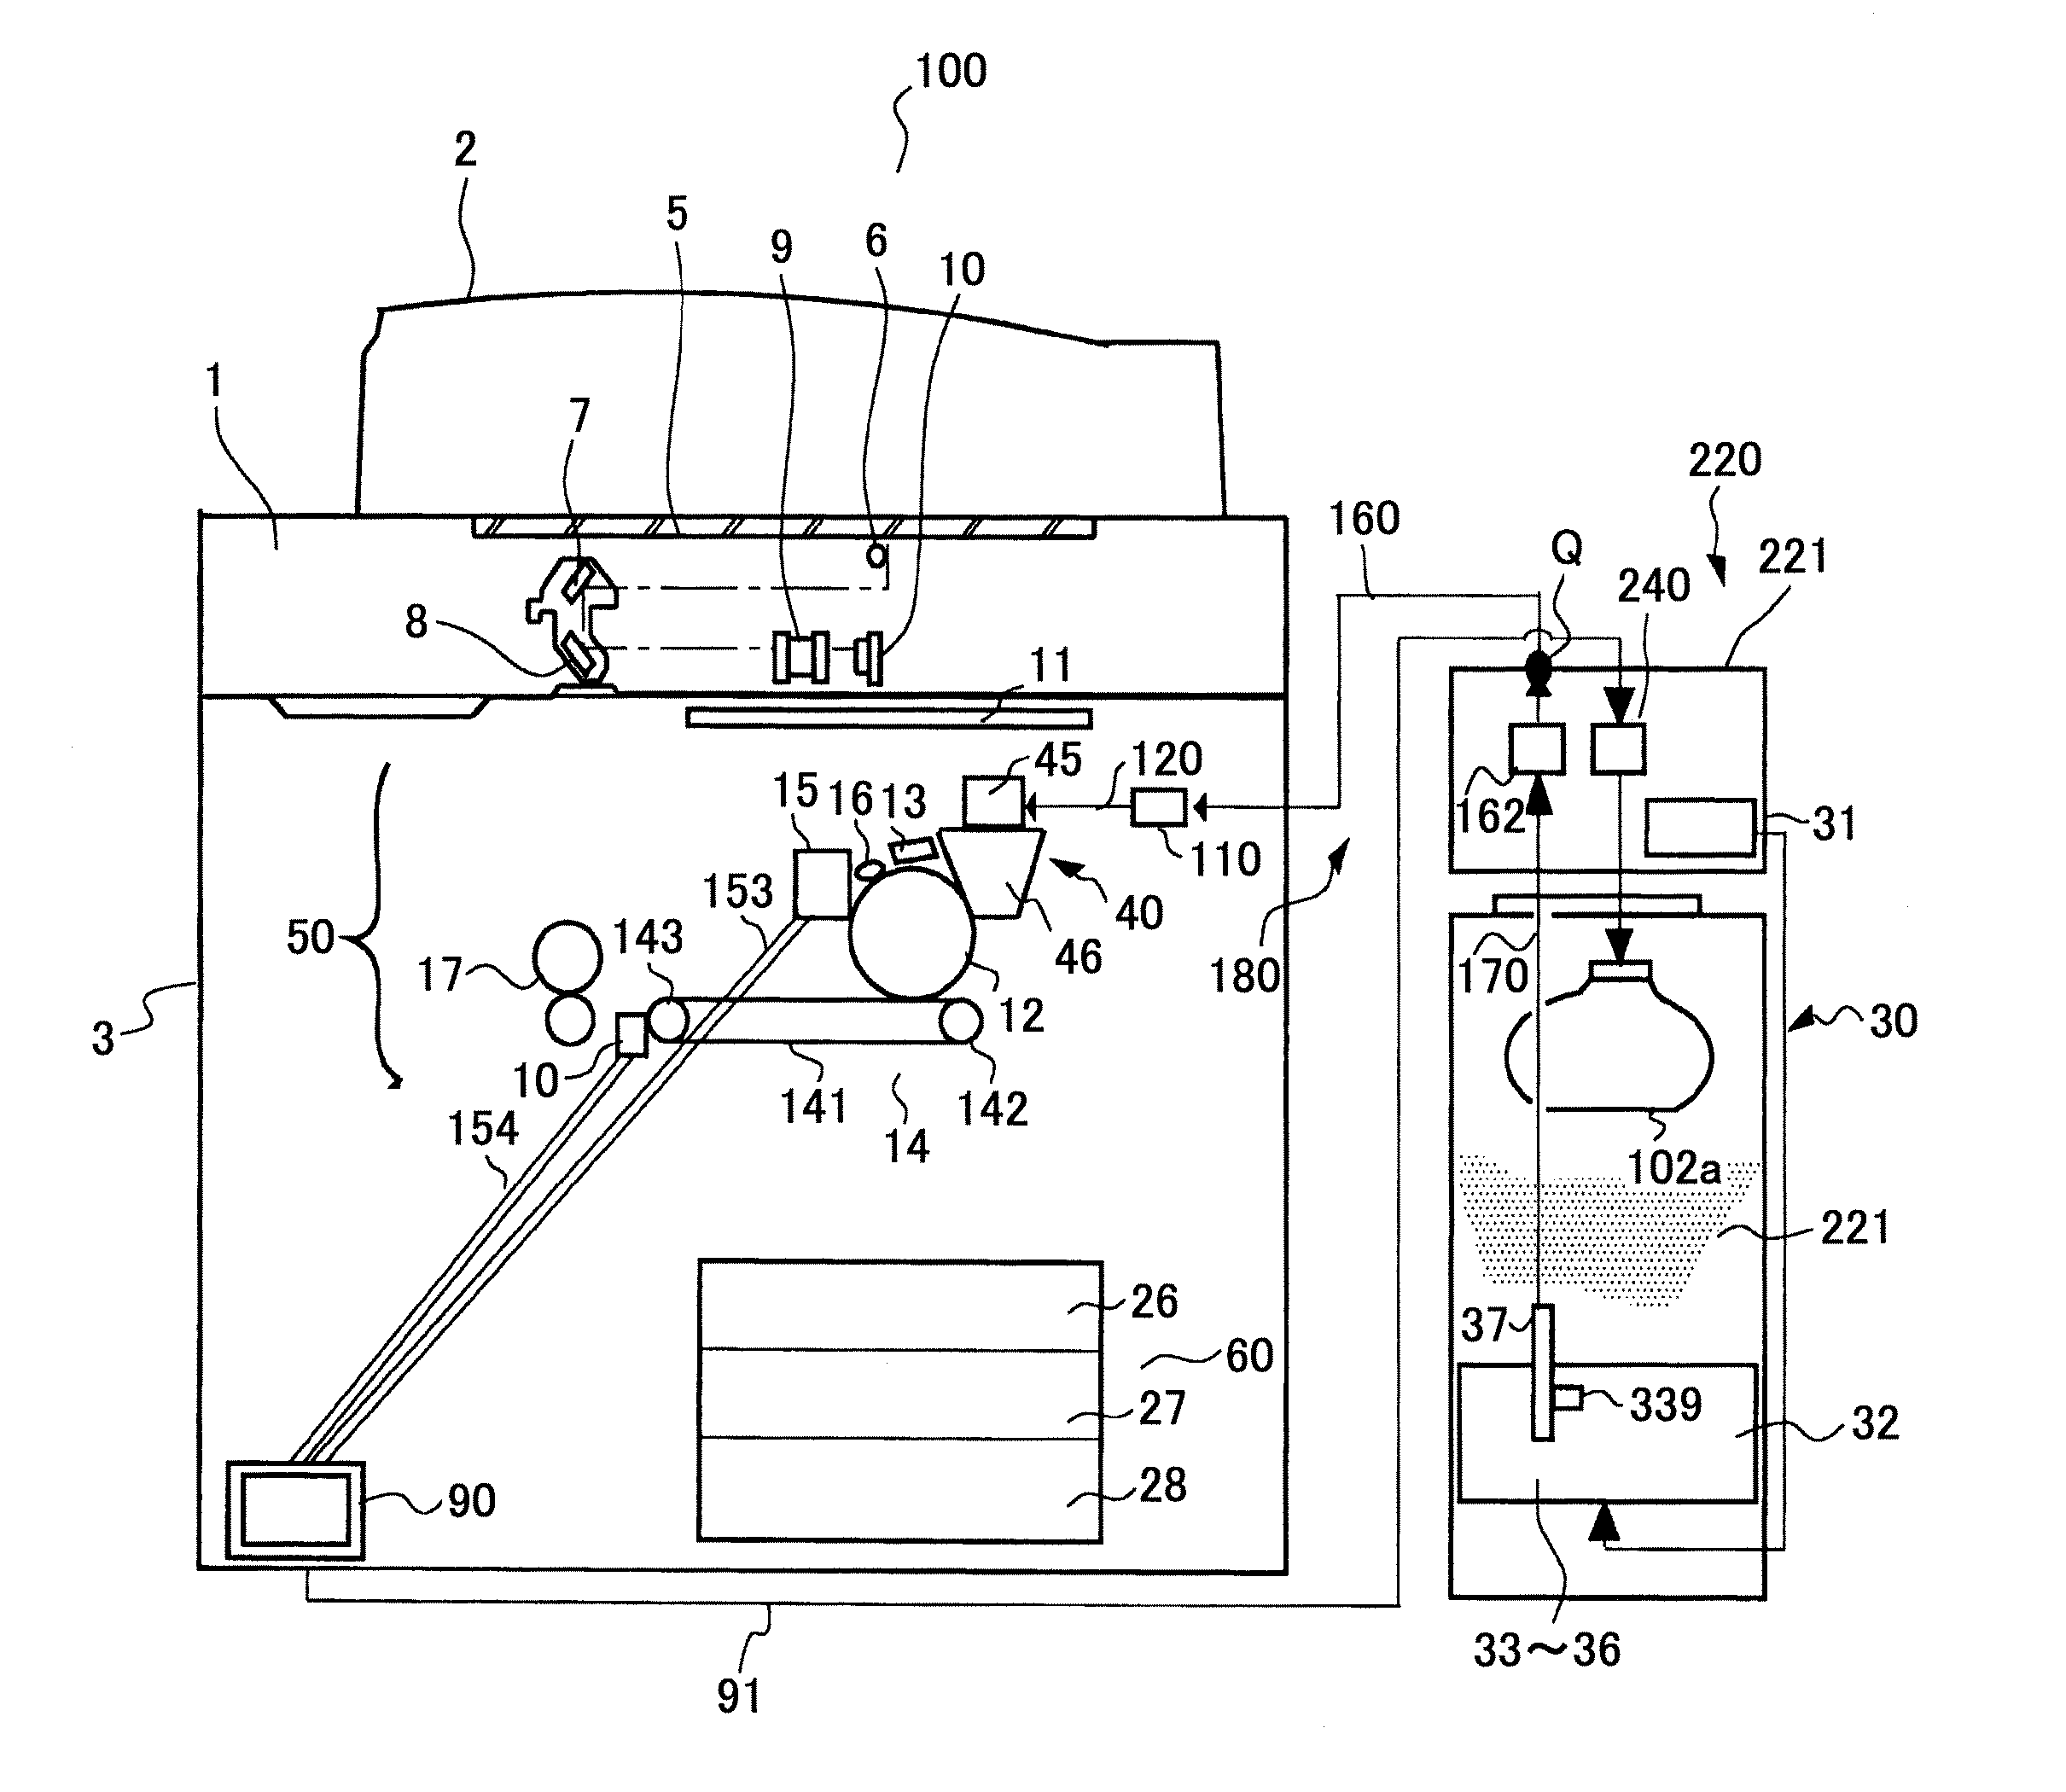 Image forming device, powder supply device, and powder storage unit